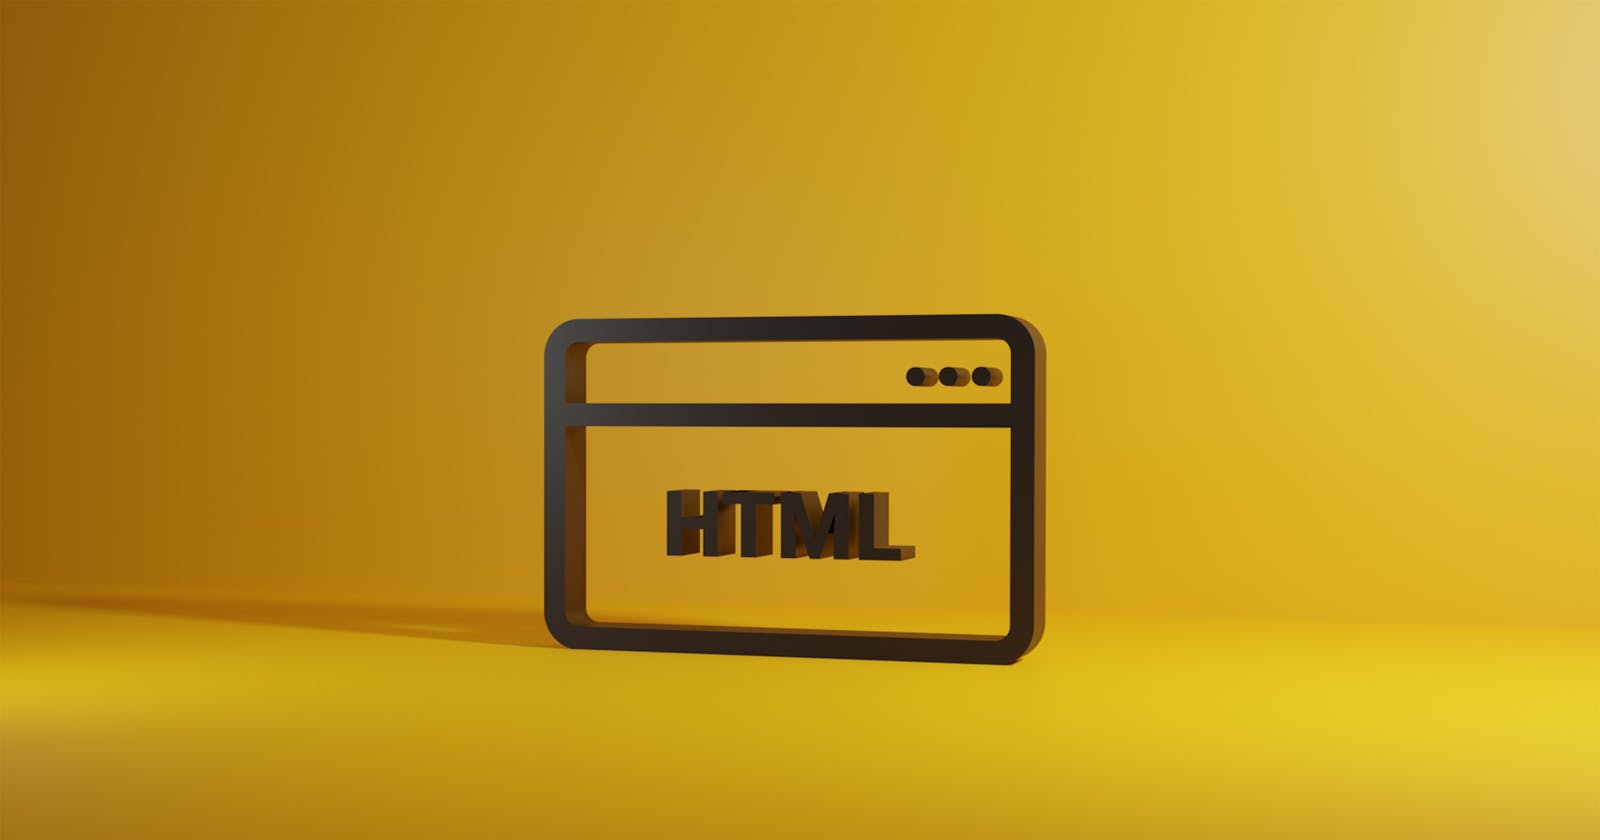 HTML can be a good start for introducing programming to kids